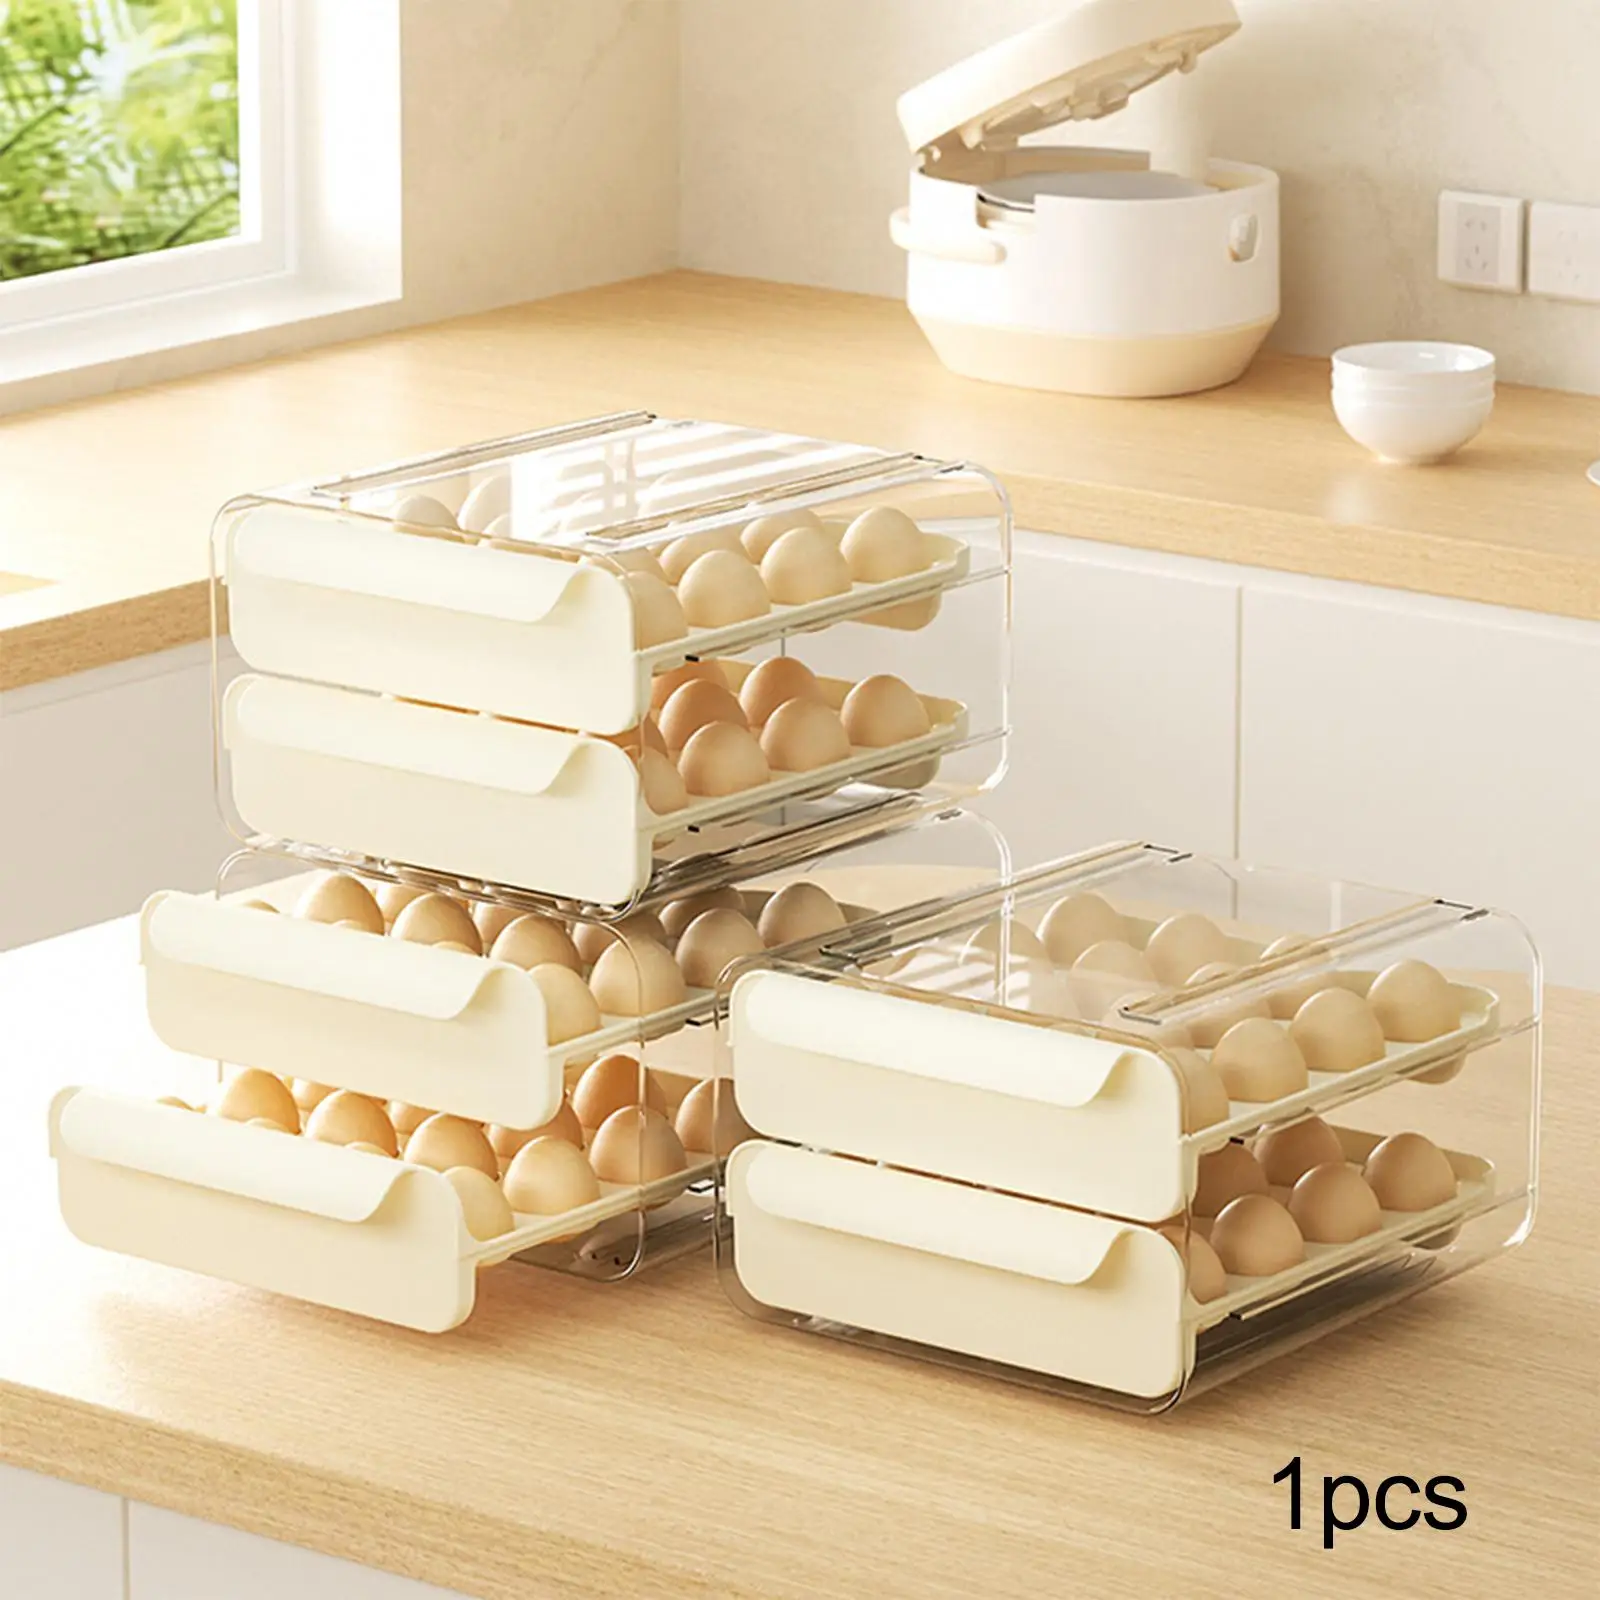 Eggs Storage Tray Pull Out Stackable 32 Egg Trays Eggs Container Egg Holder for Countertop Pantry Cupboard Refrigerator Kitchen